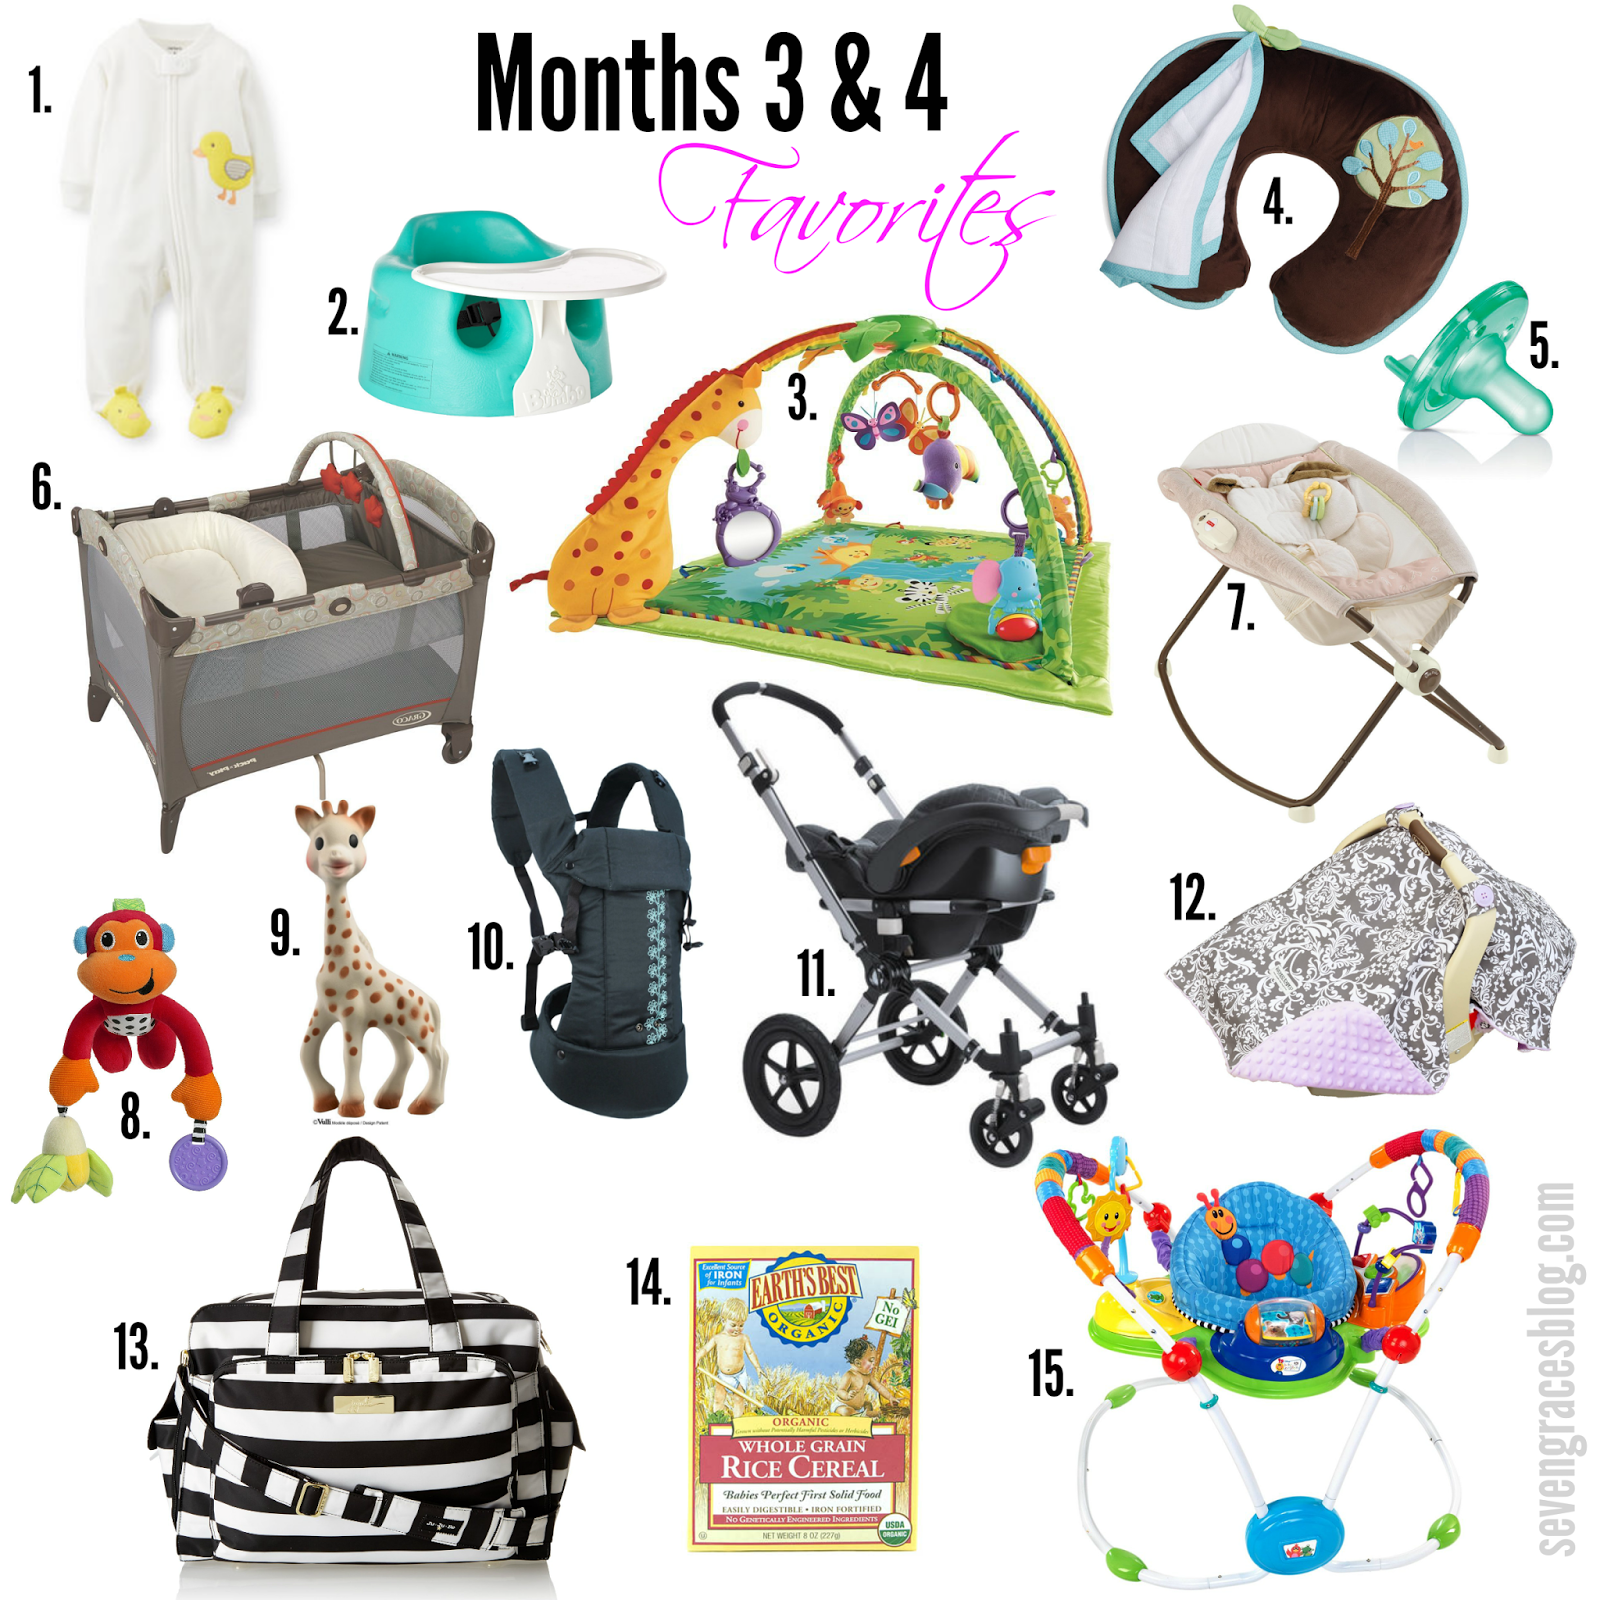 Top 15 Baby Items for Months 3 \u0026 4 